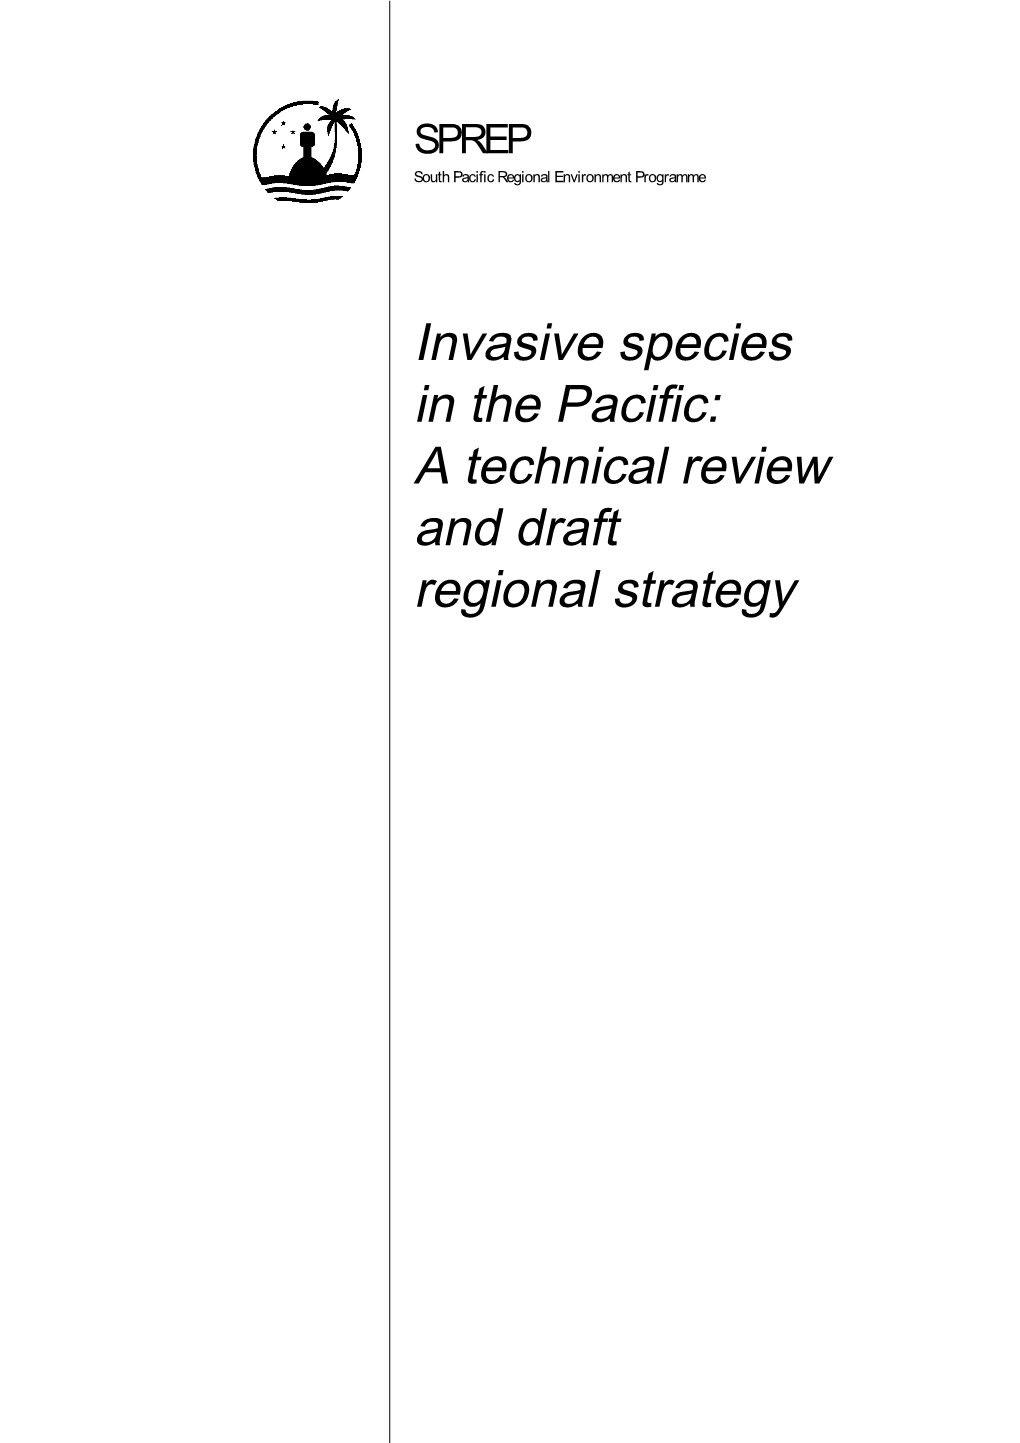 Invasive Species in the Pacific: a Technical Review and Draft Regional Strategy Invasive Species in the Pacific: a Technical Review and Draft Regional Strategy